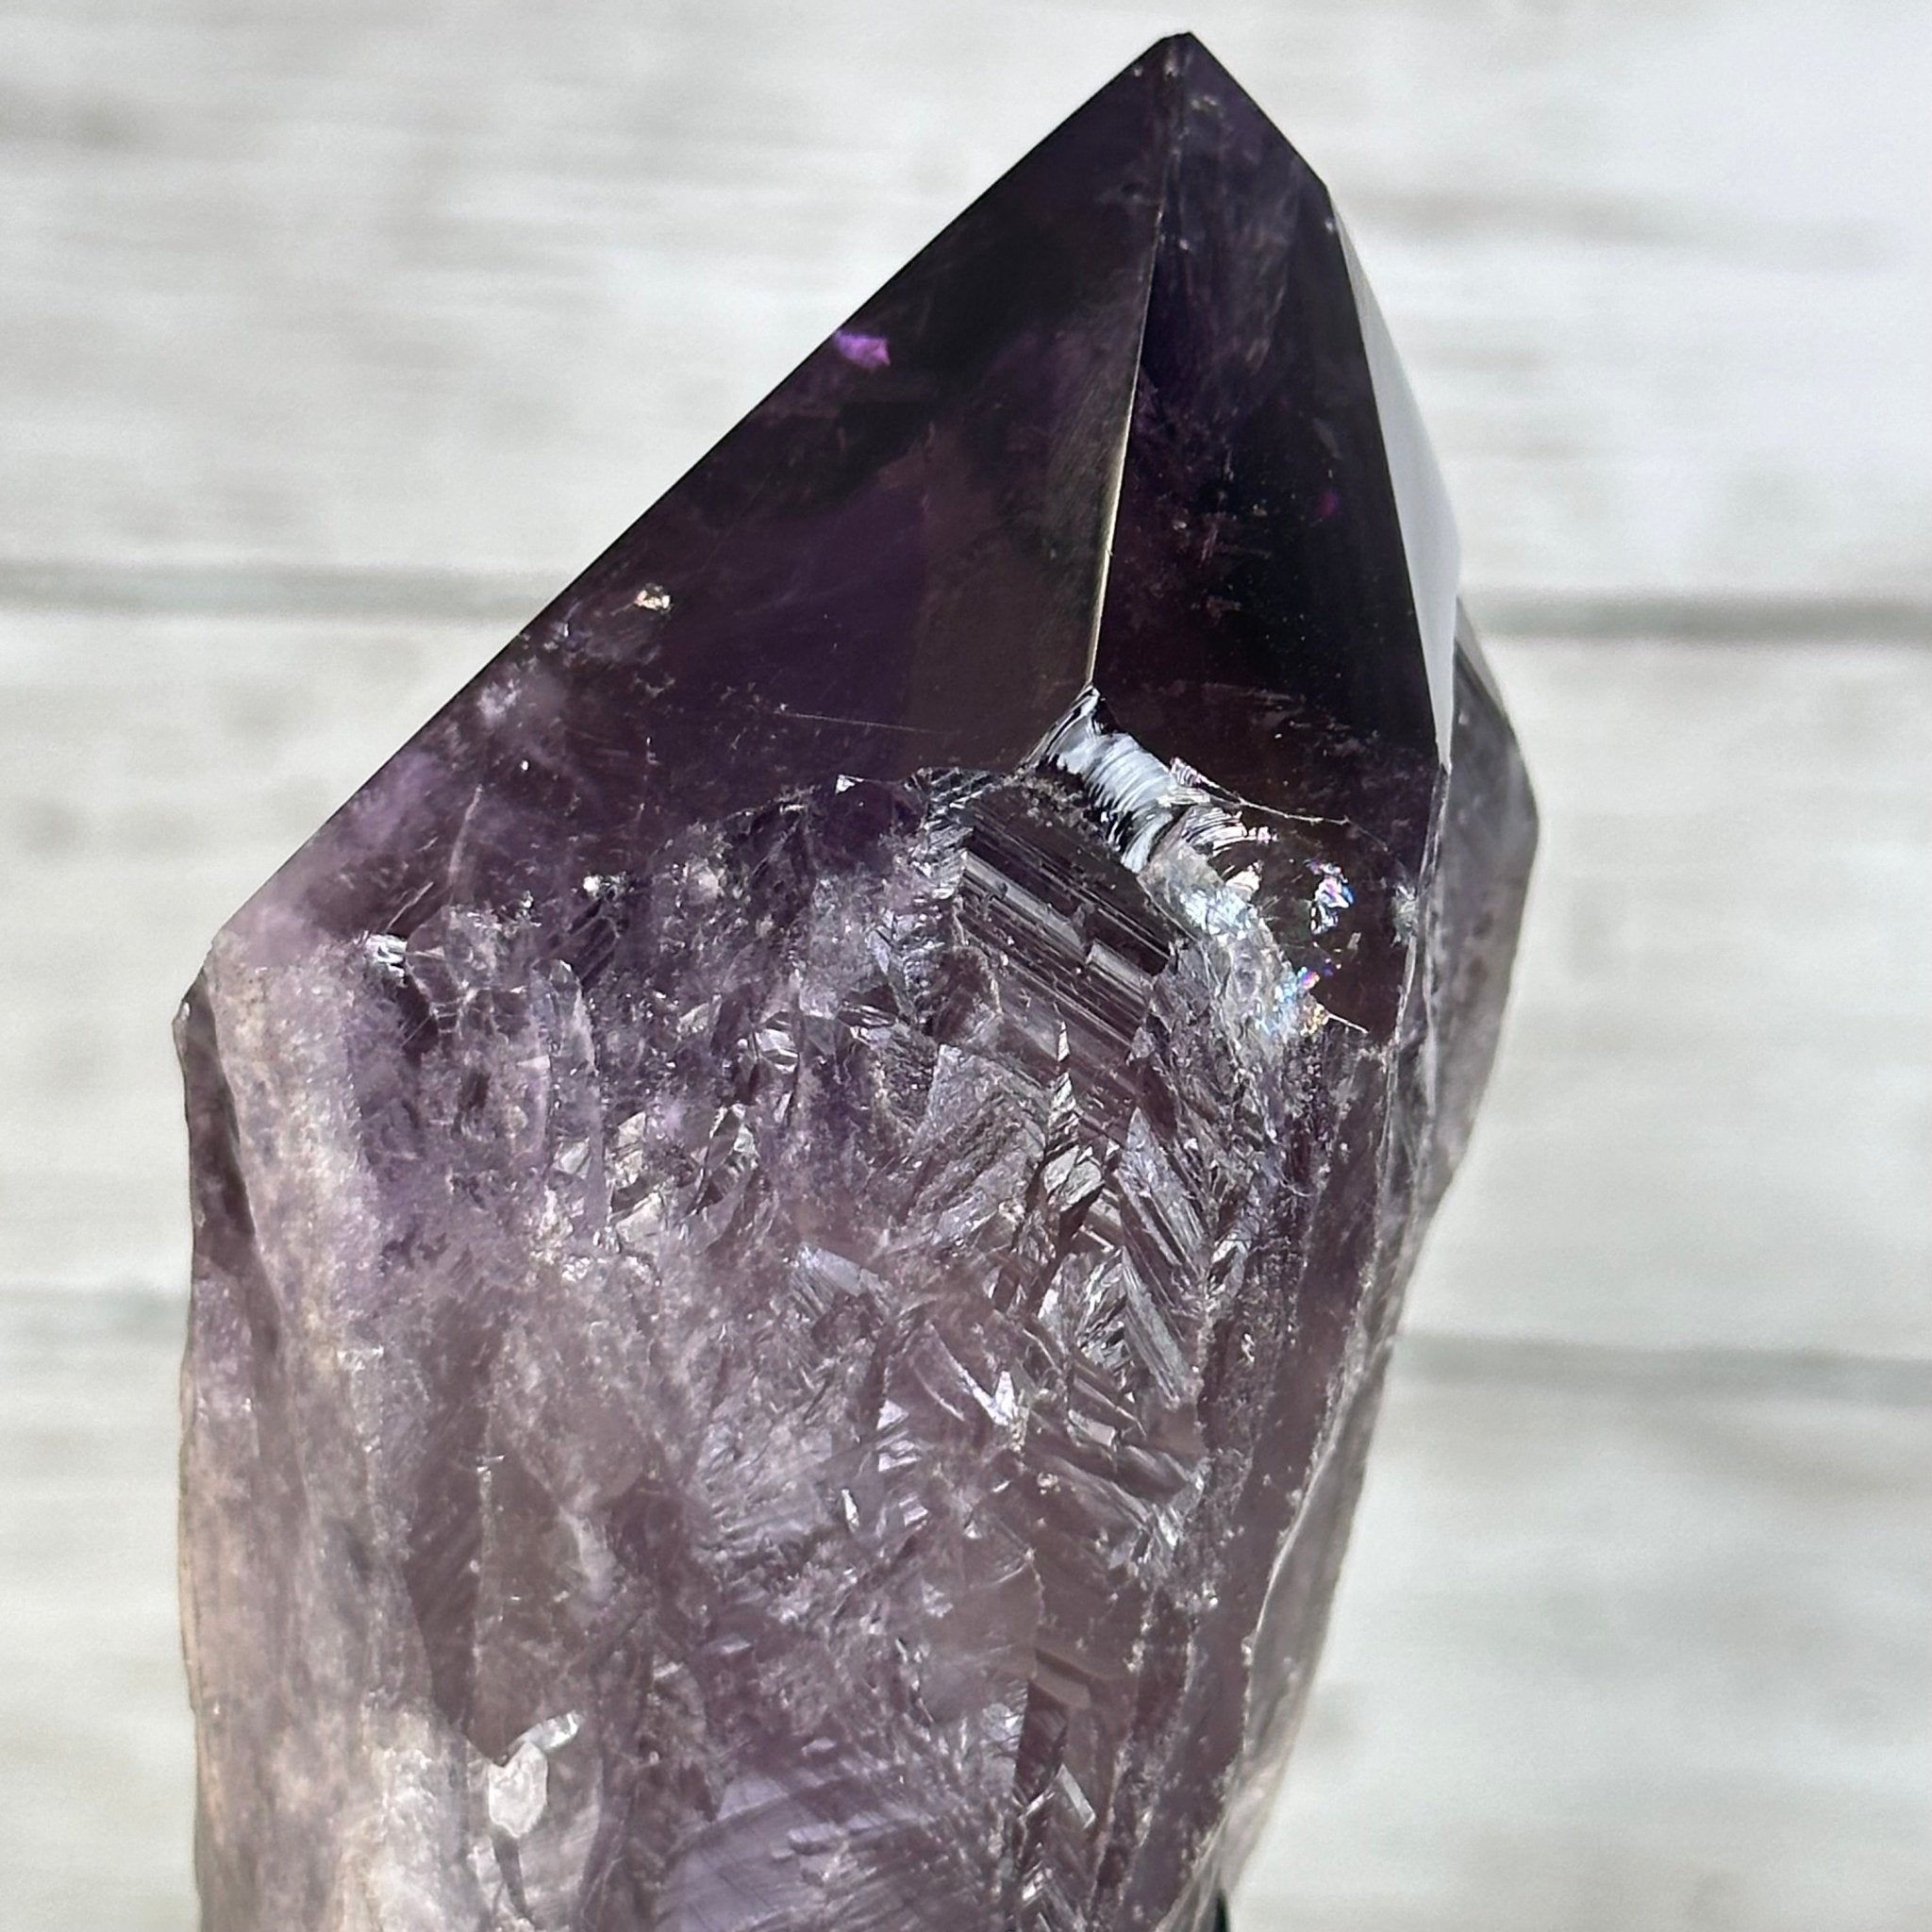 Super Quality Amethyst Wand on a Metal Stand, 1.9 lbs & 9.2" Tall #3123AM-006 - Brazil GemsBrazil GemsSuper Quality Amethyst Wand on a Metal Stand, 1.9 lbs & 9.2" Tall #3123AM-006Clusters on Fixed Bases3123AM-006